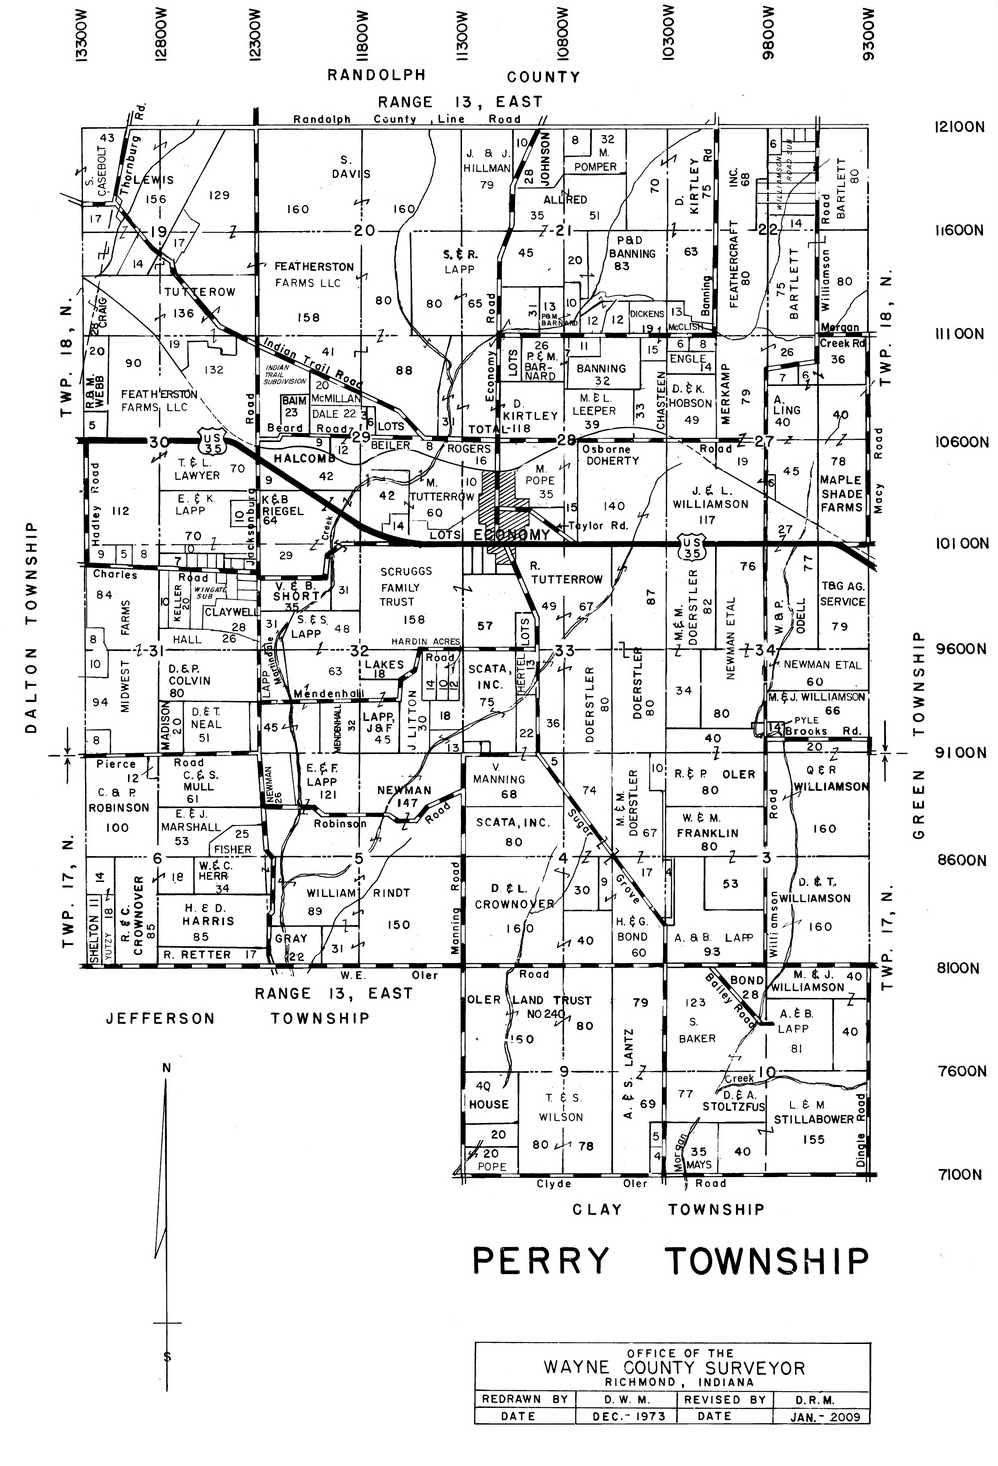 Map of Perry Township, Wayne County, Indiana